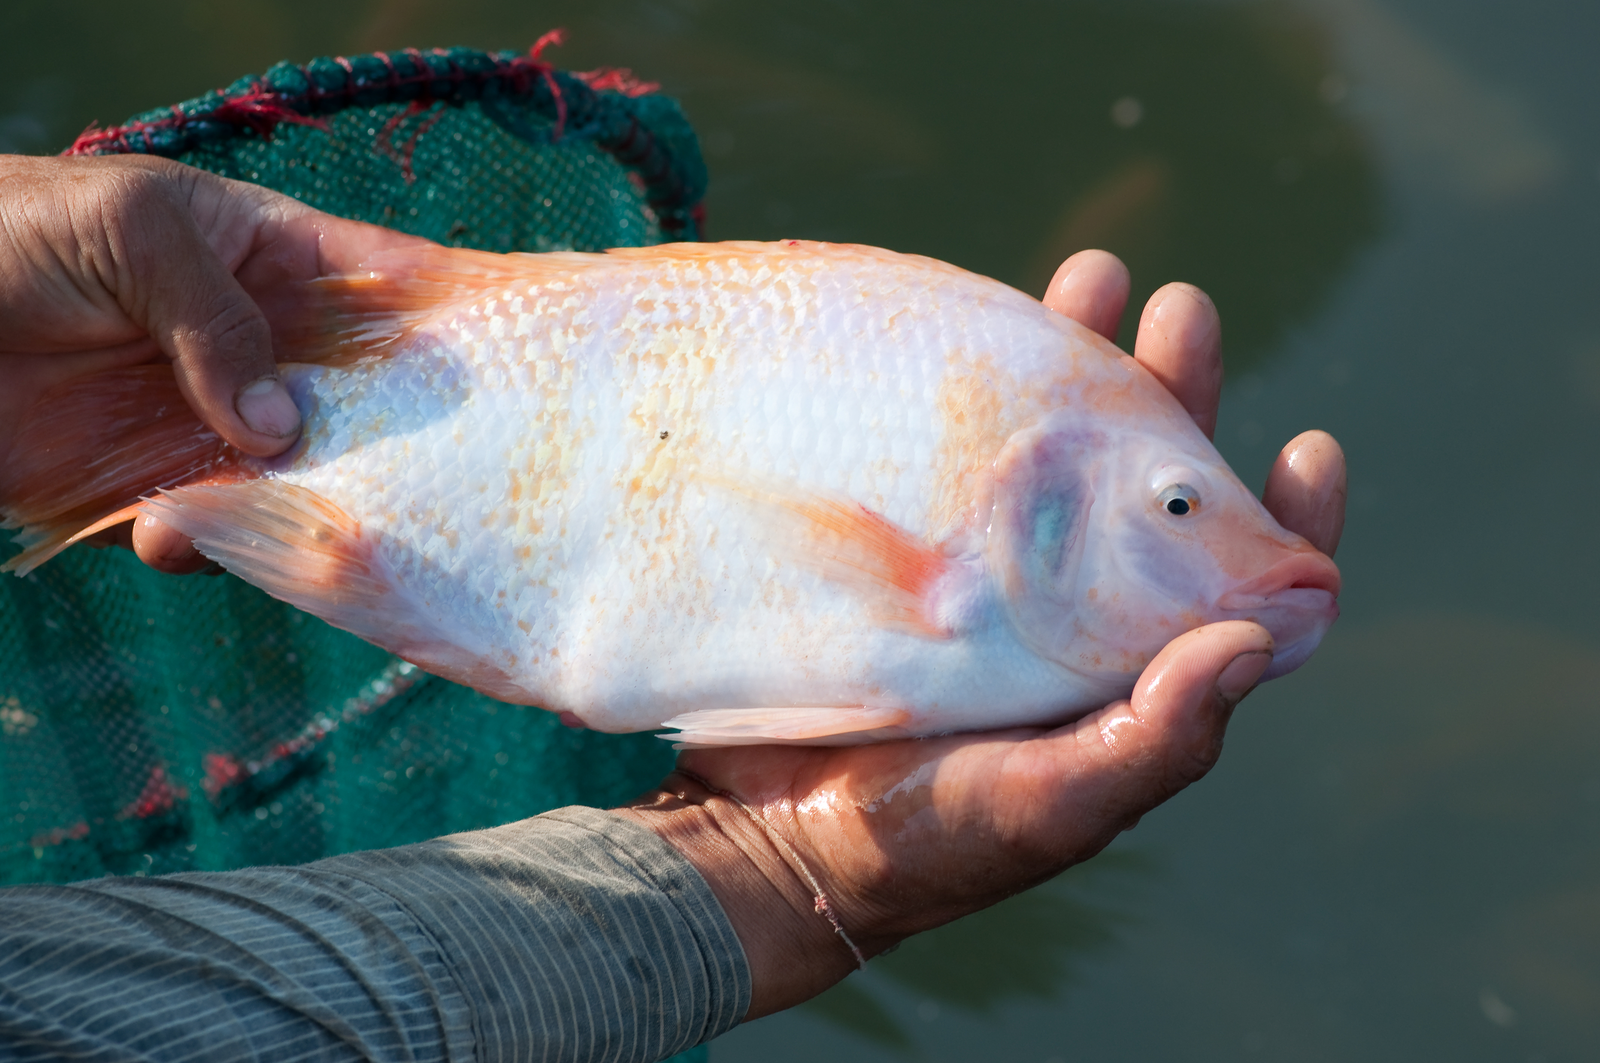 Nile Tilapia to benefit from NSP-ases in diet